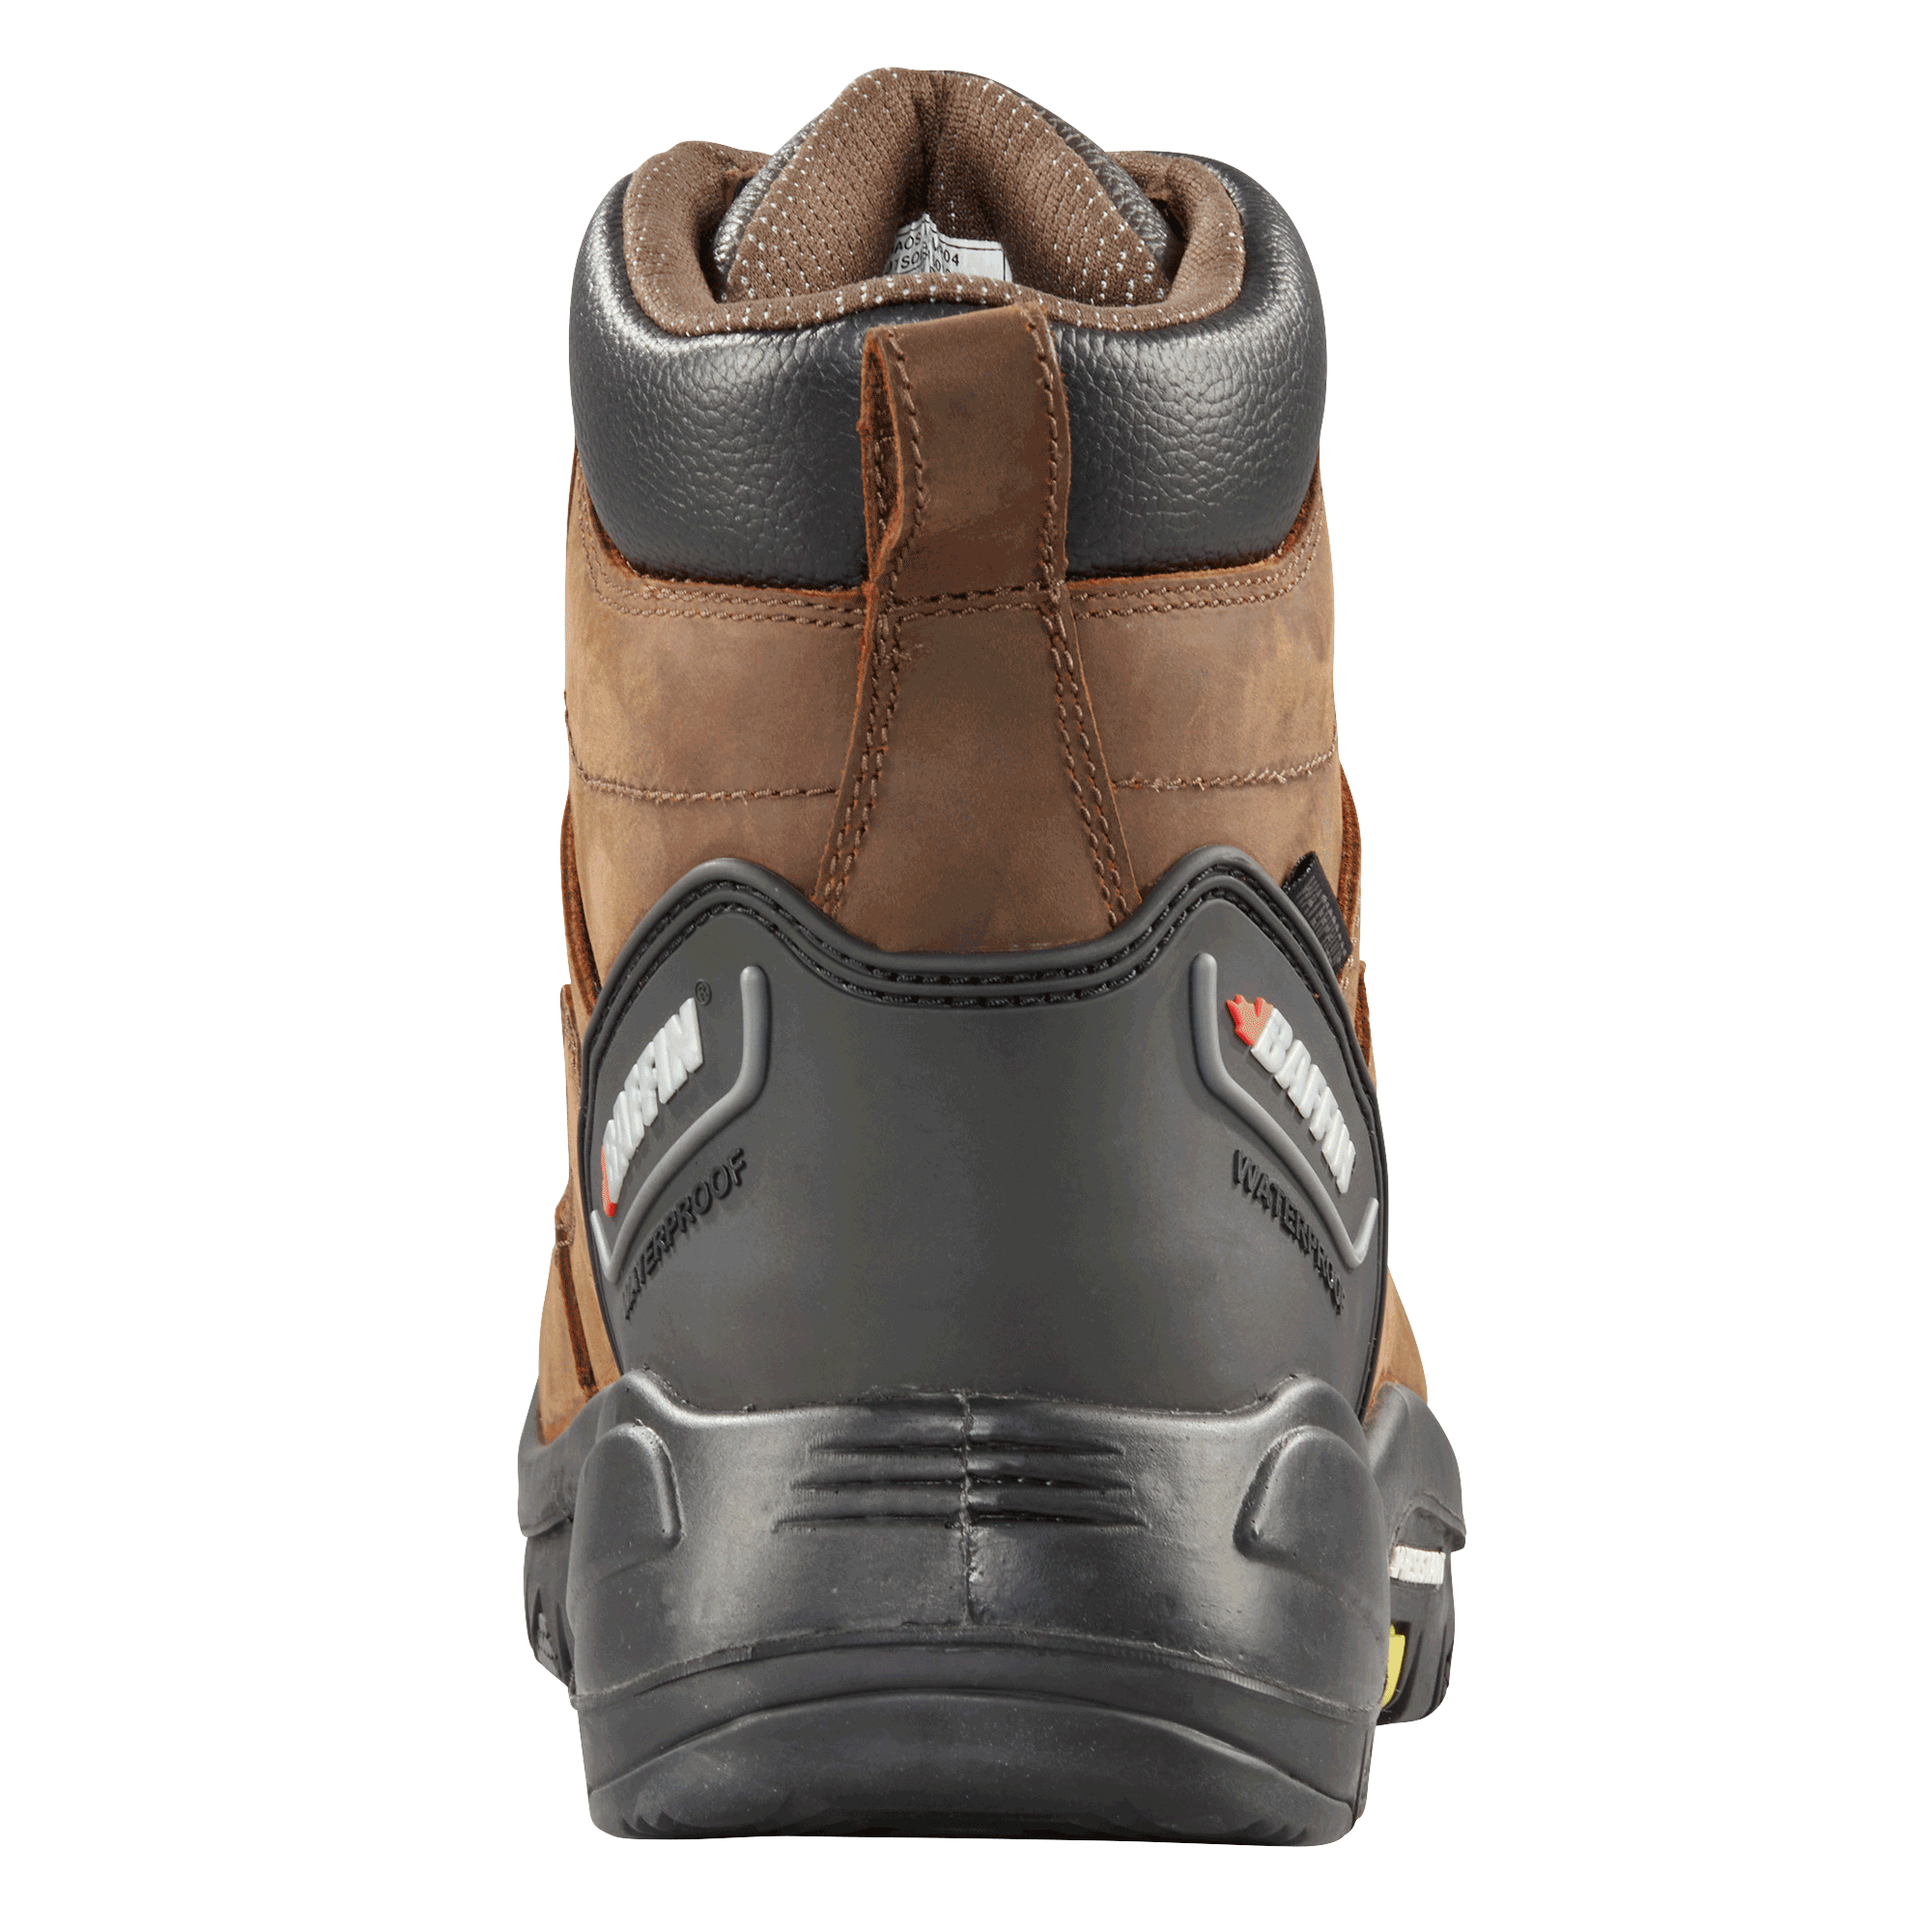 CHAOS (Safety Toe & Plate) | Men's Boot